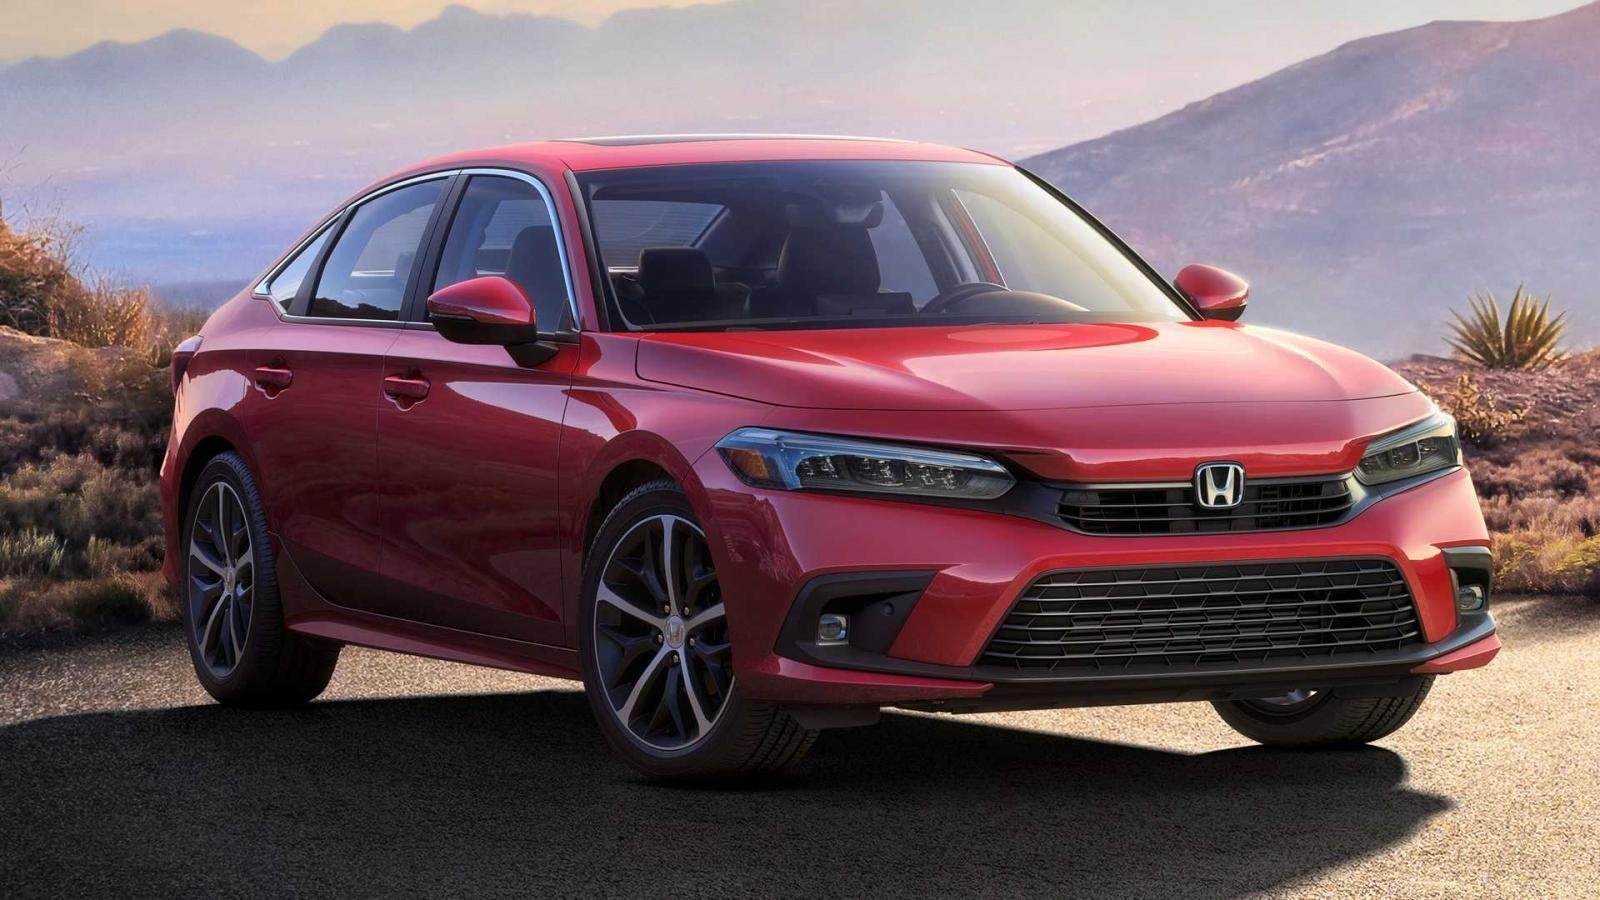 Honda Globally Unveils The 11th-Generation Civic, Won't Be Launched In India